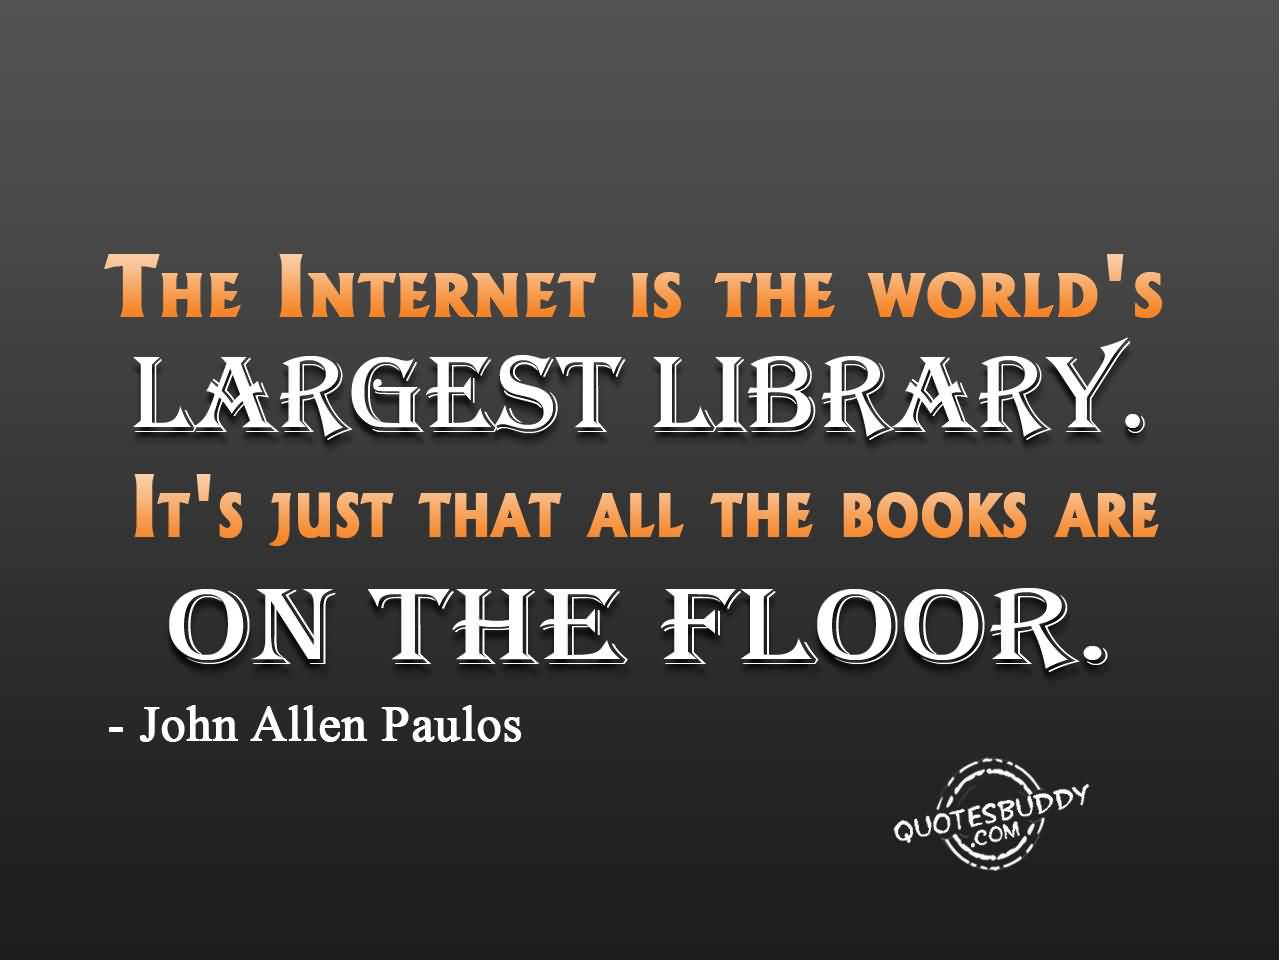 The Internet is the world’s largest library. It’s just that all the books are on the floor. John Allen Paulos